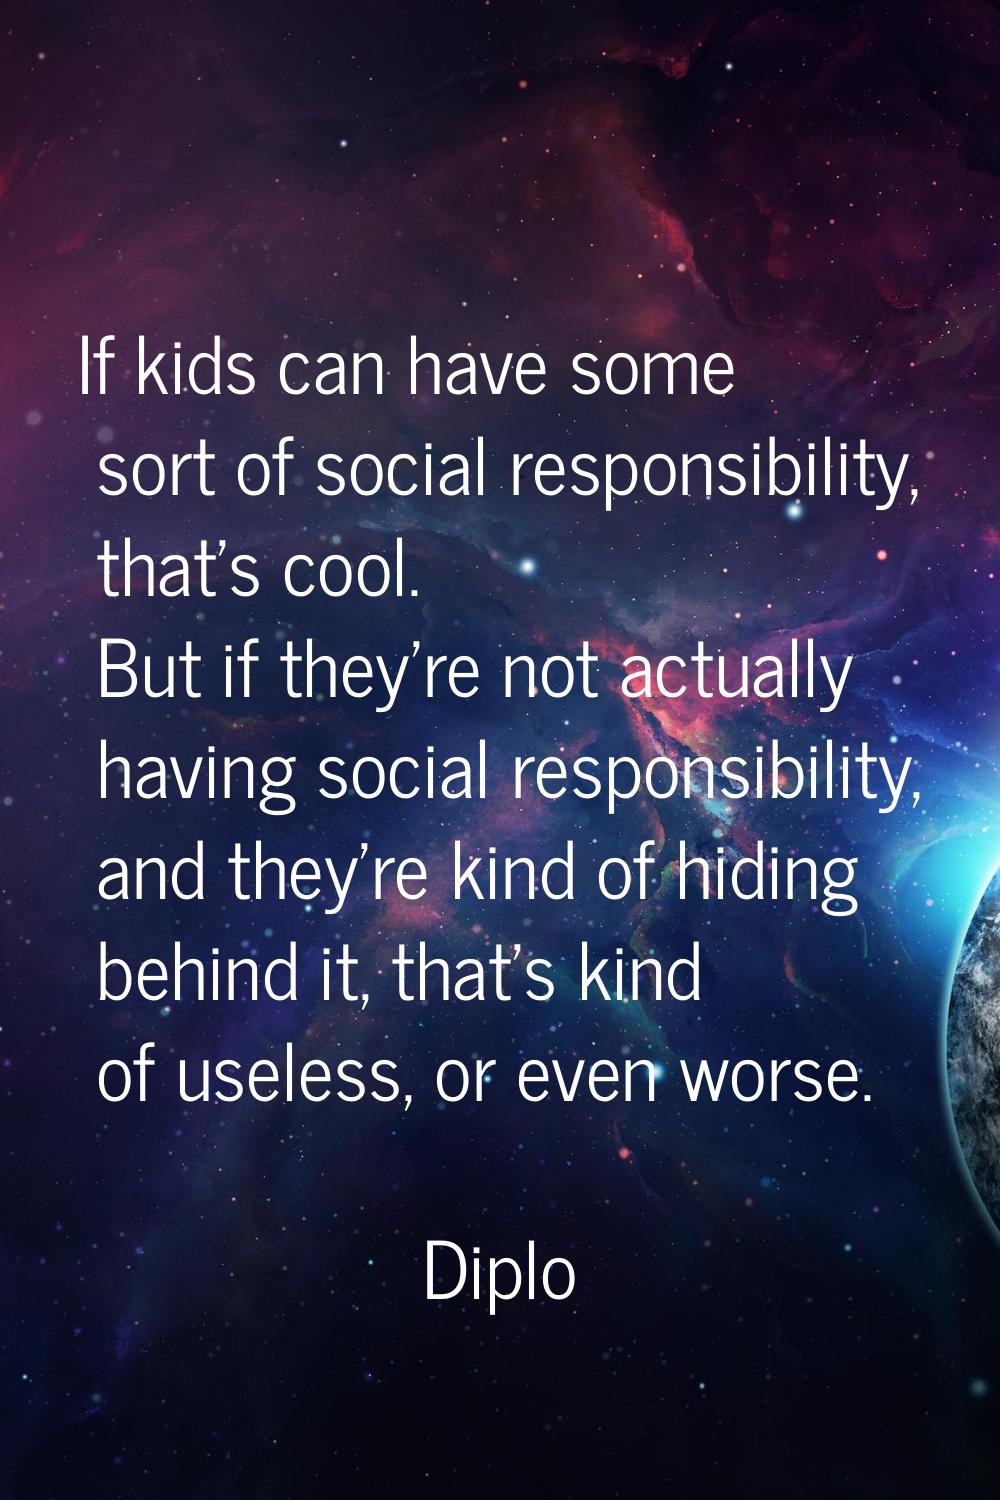 If kids can have some sort of social responsibility, that's cool. But if they're not actually havin